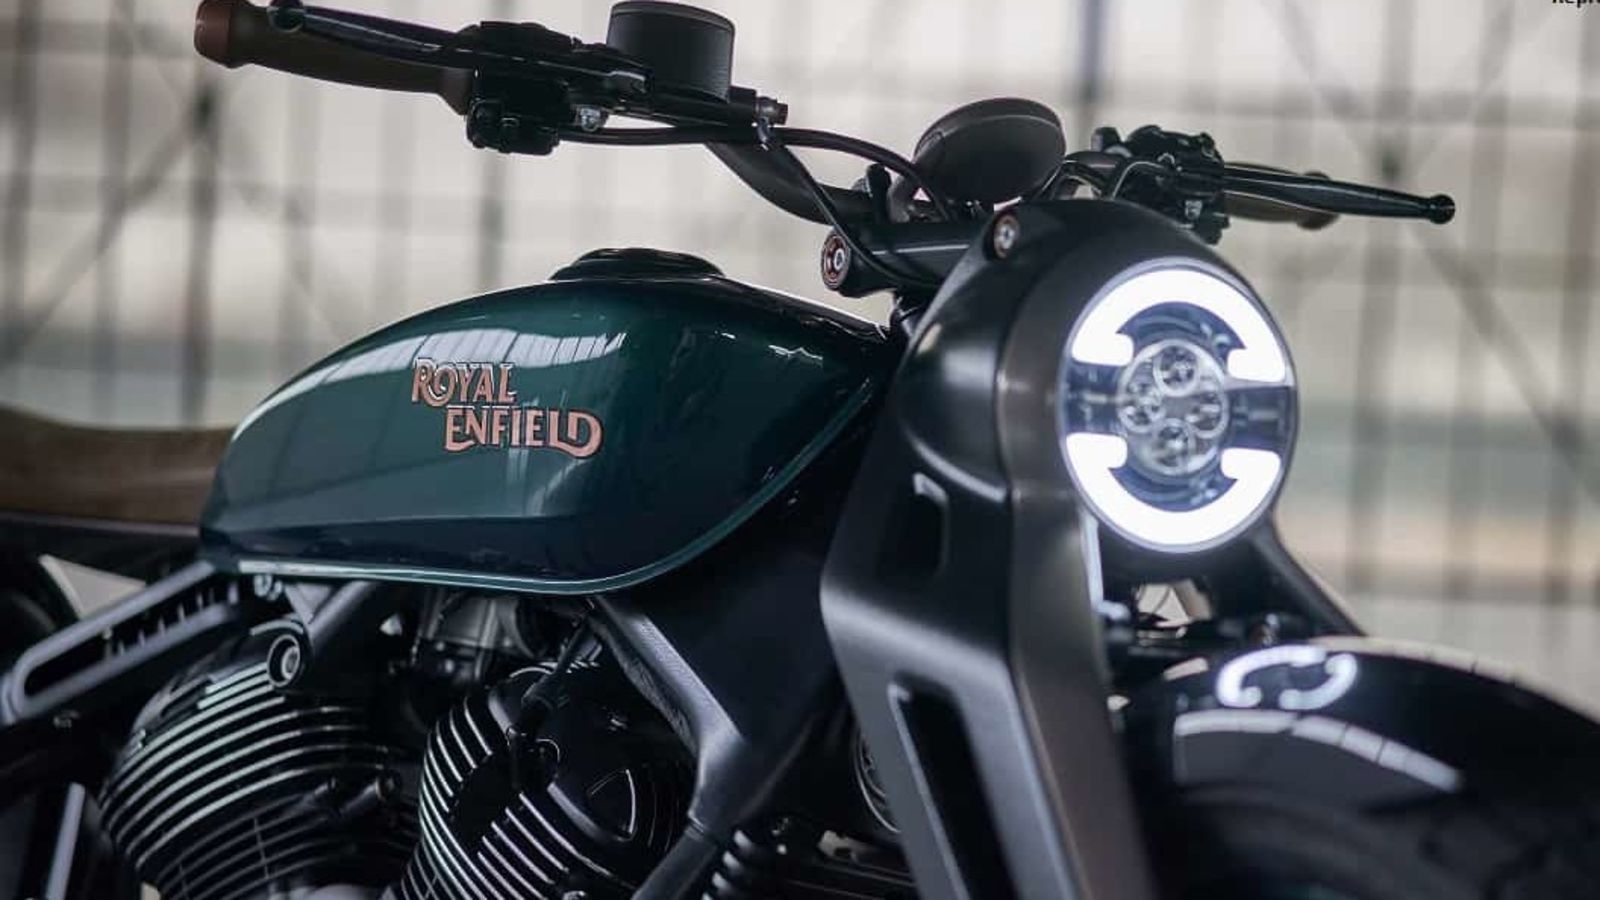 Top upcoming Royal Enfield bikes in 2021 | HT Auto